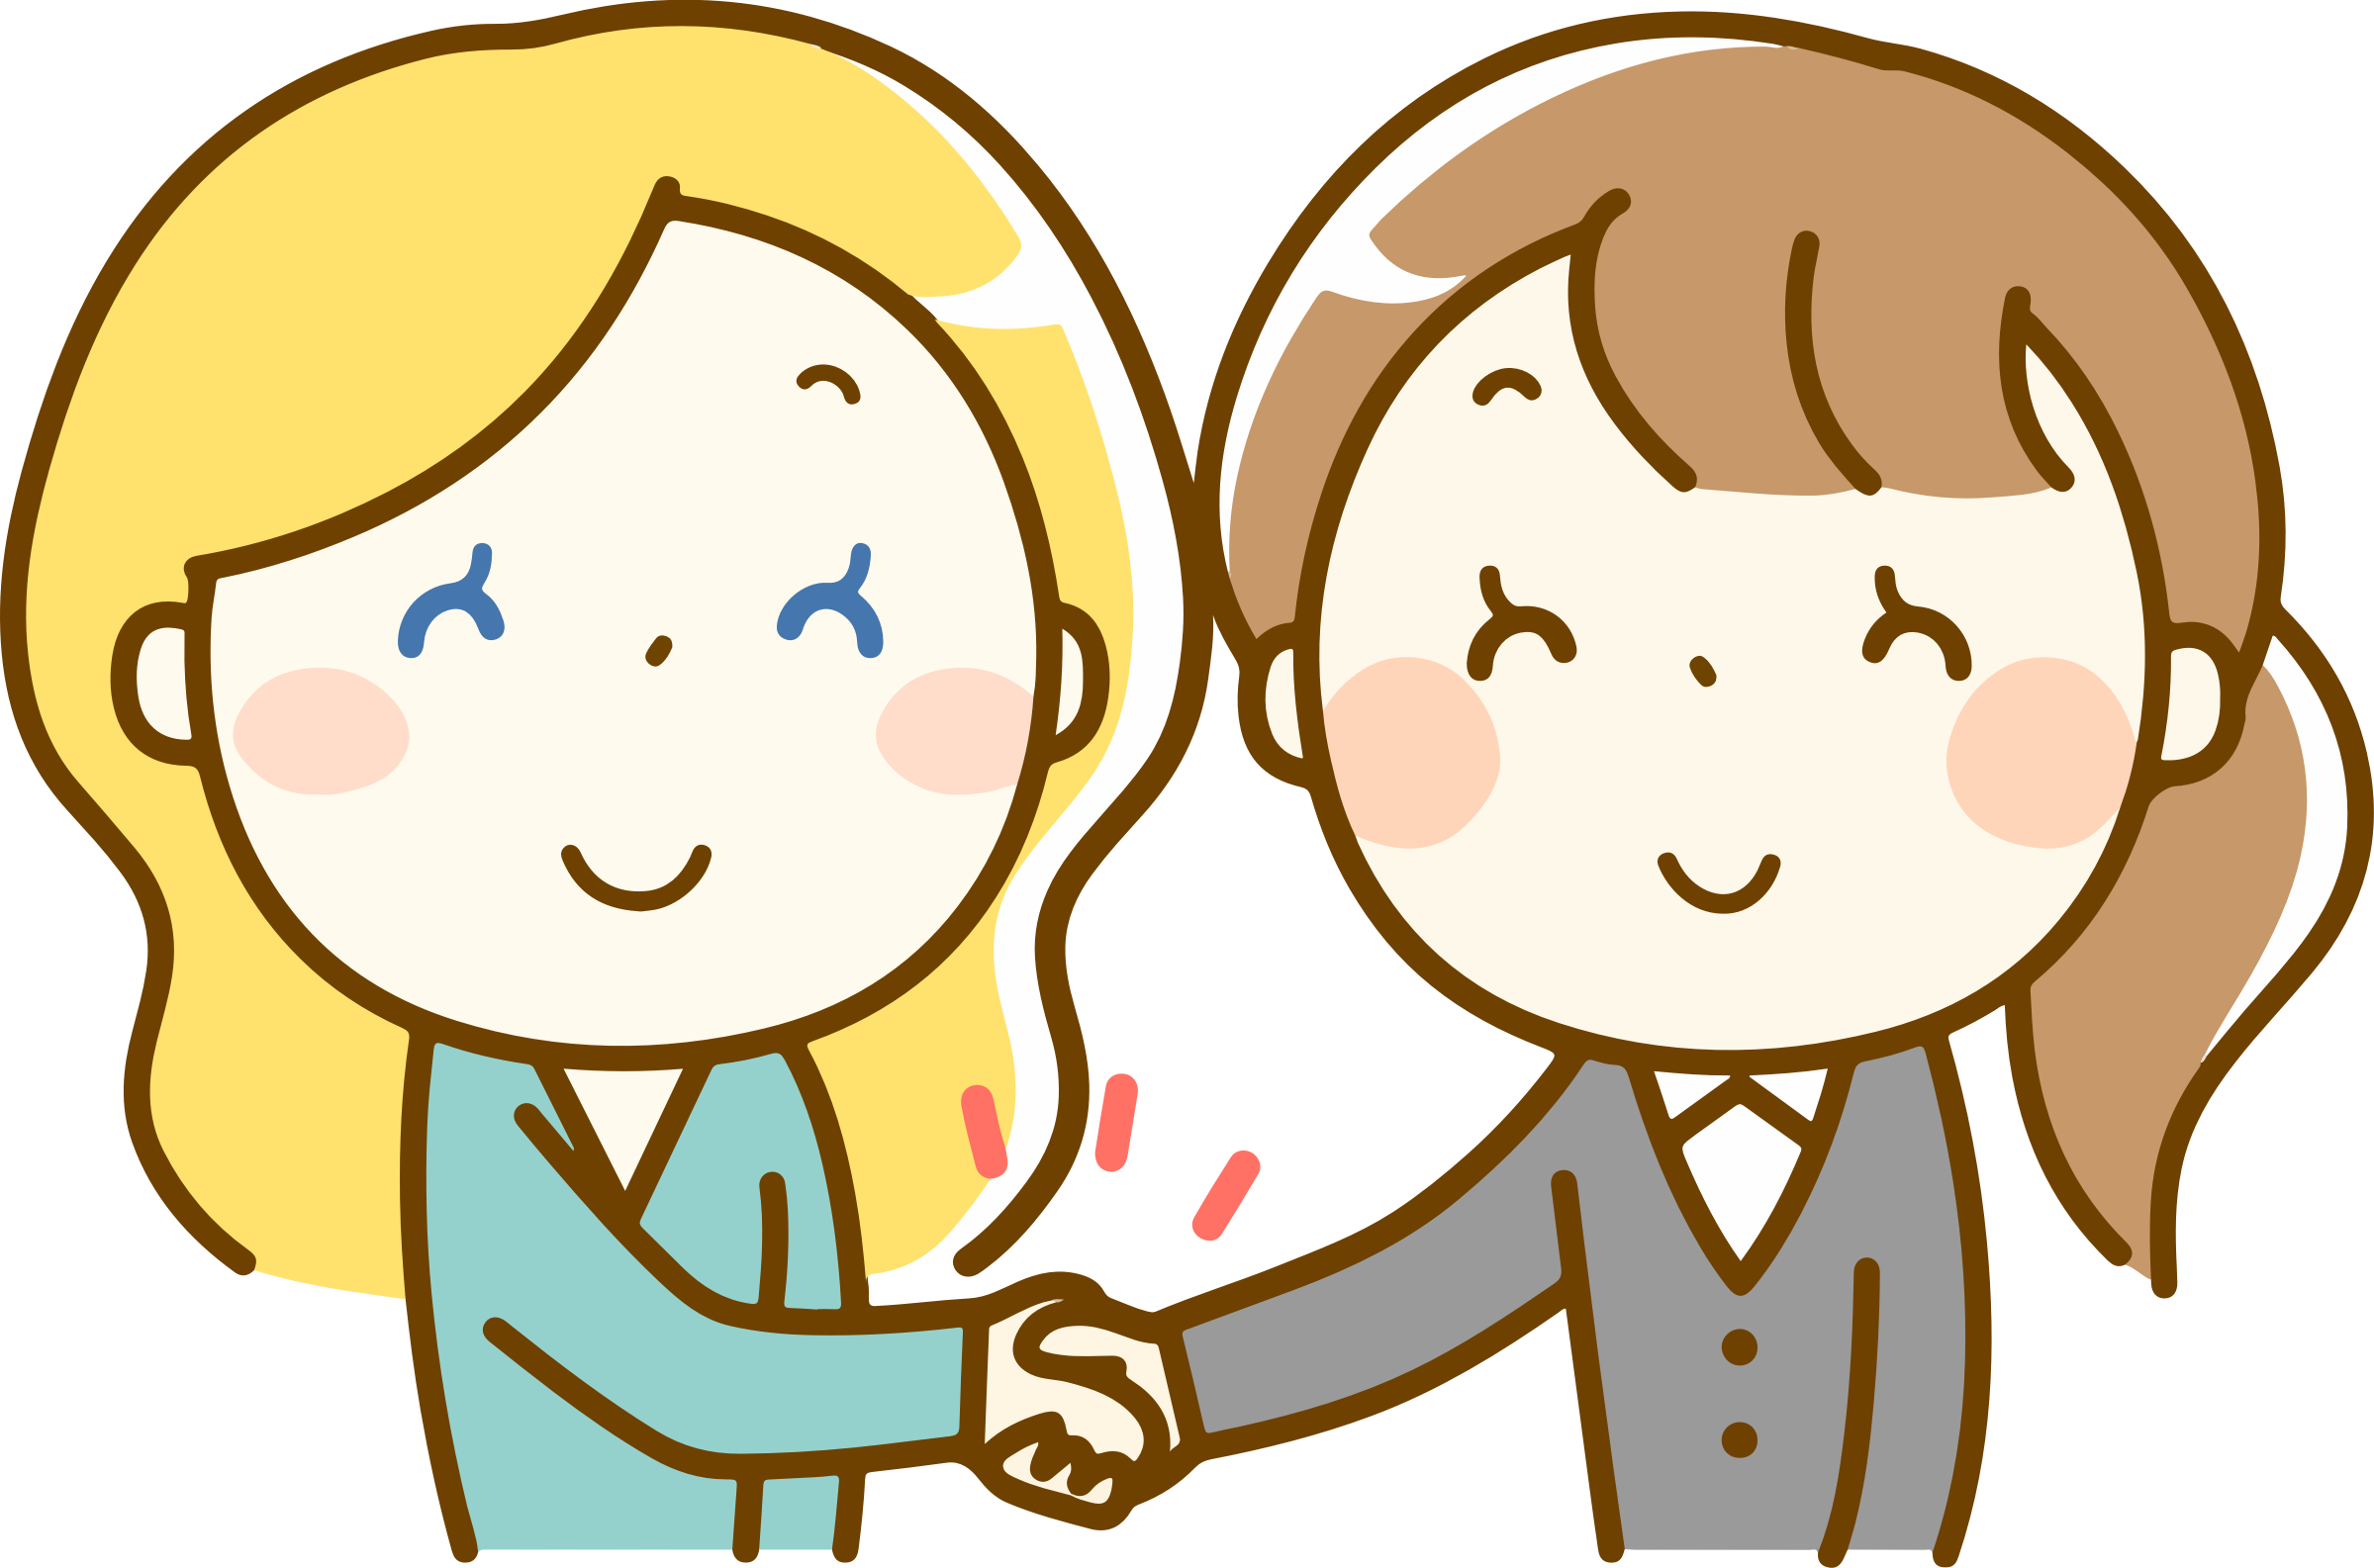 A Cartoon Of A Man And Woman Shaking Hands